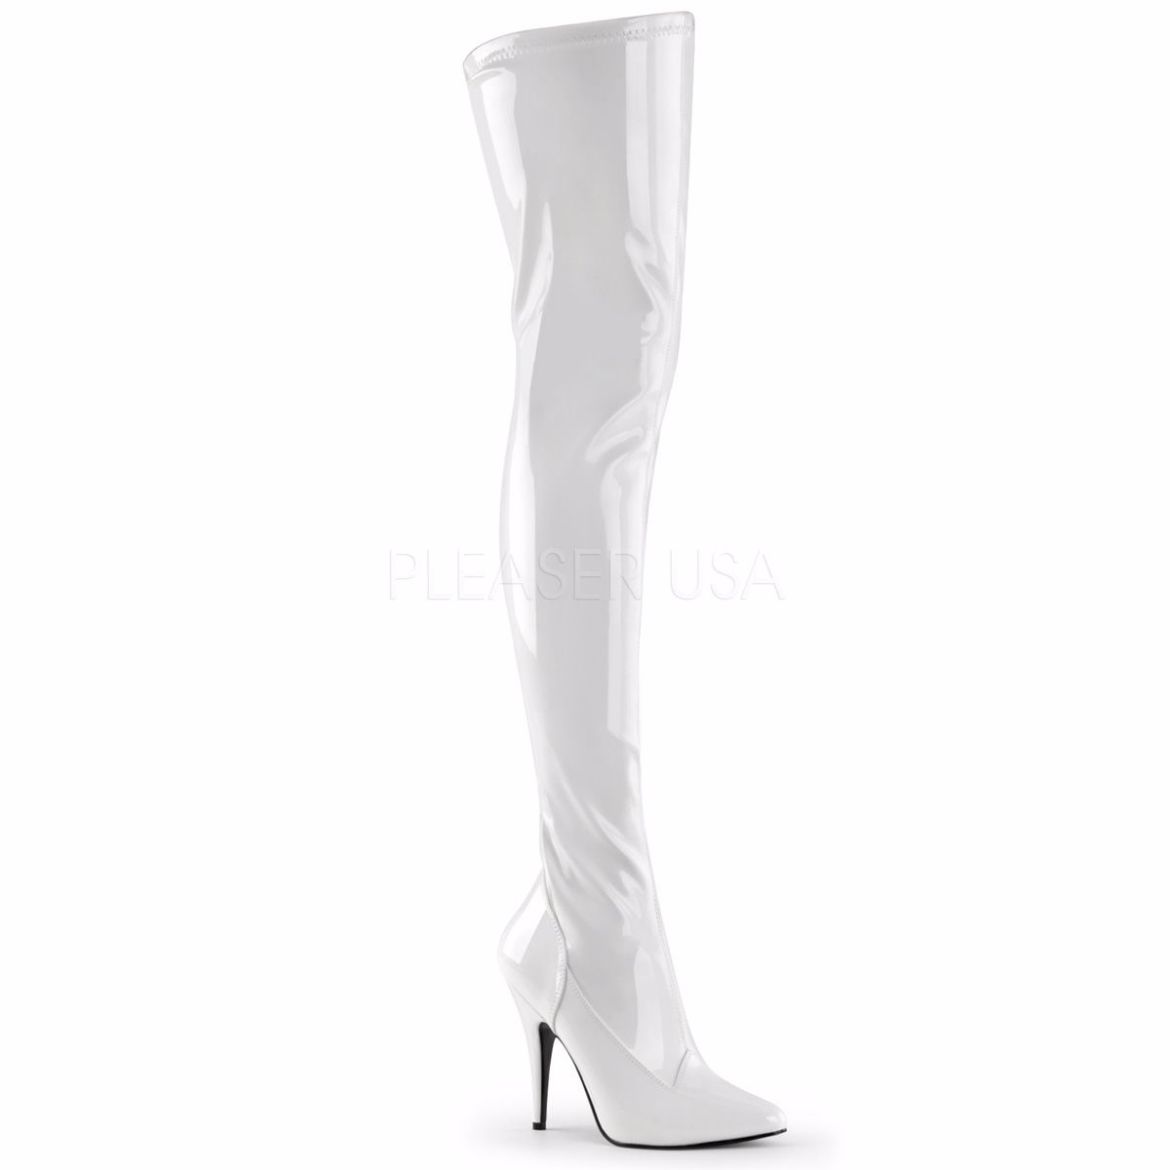 Product image of Pleaser Seduce-3000 White Stretch Patent, 5 inch (12.7 cm) Heel Thigh High Boot